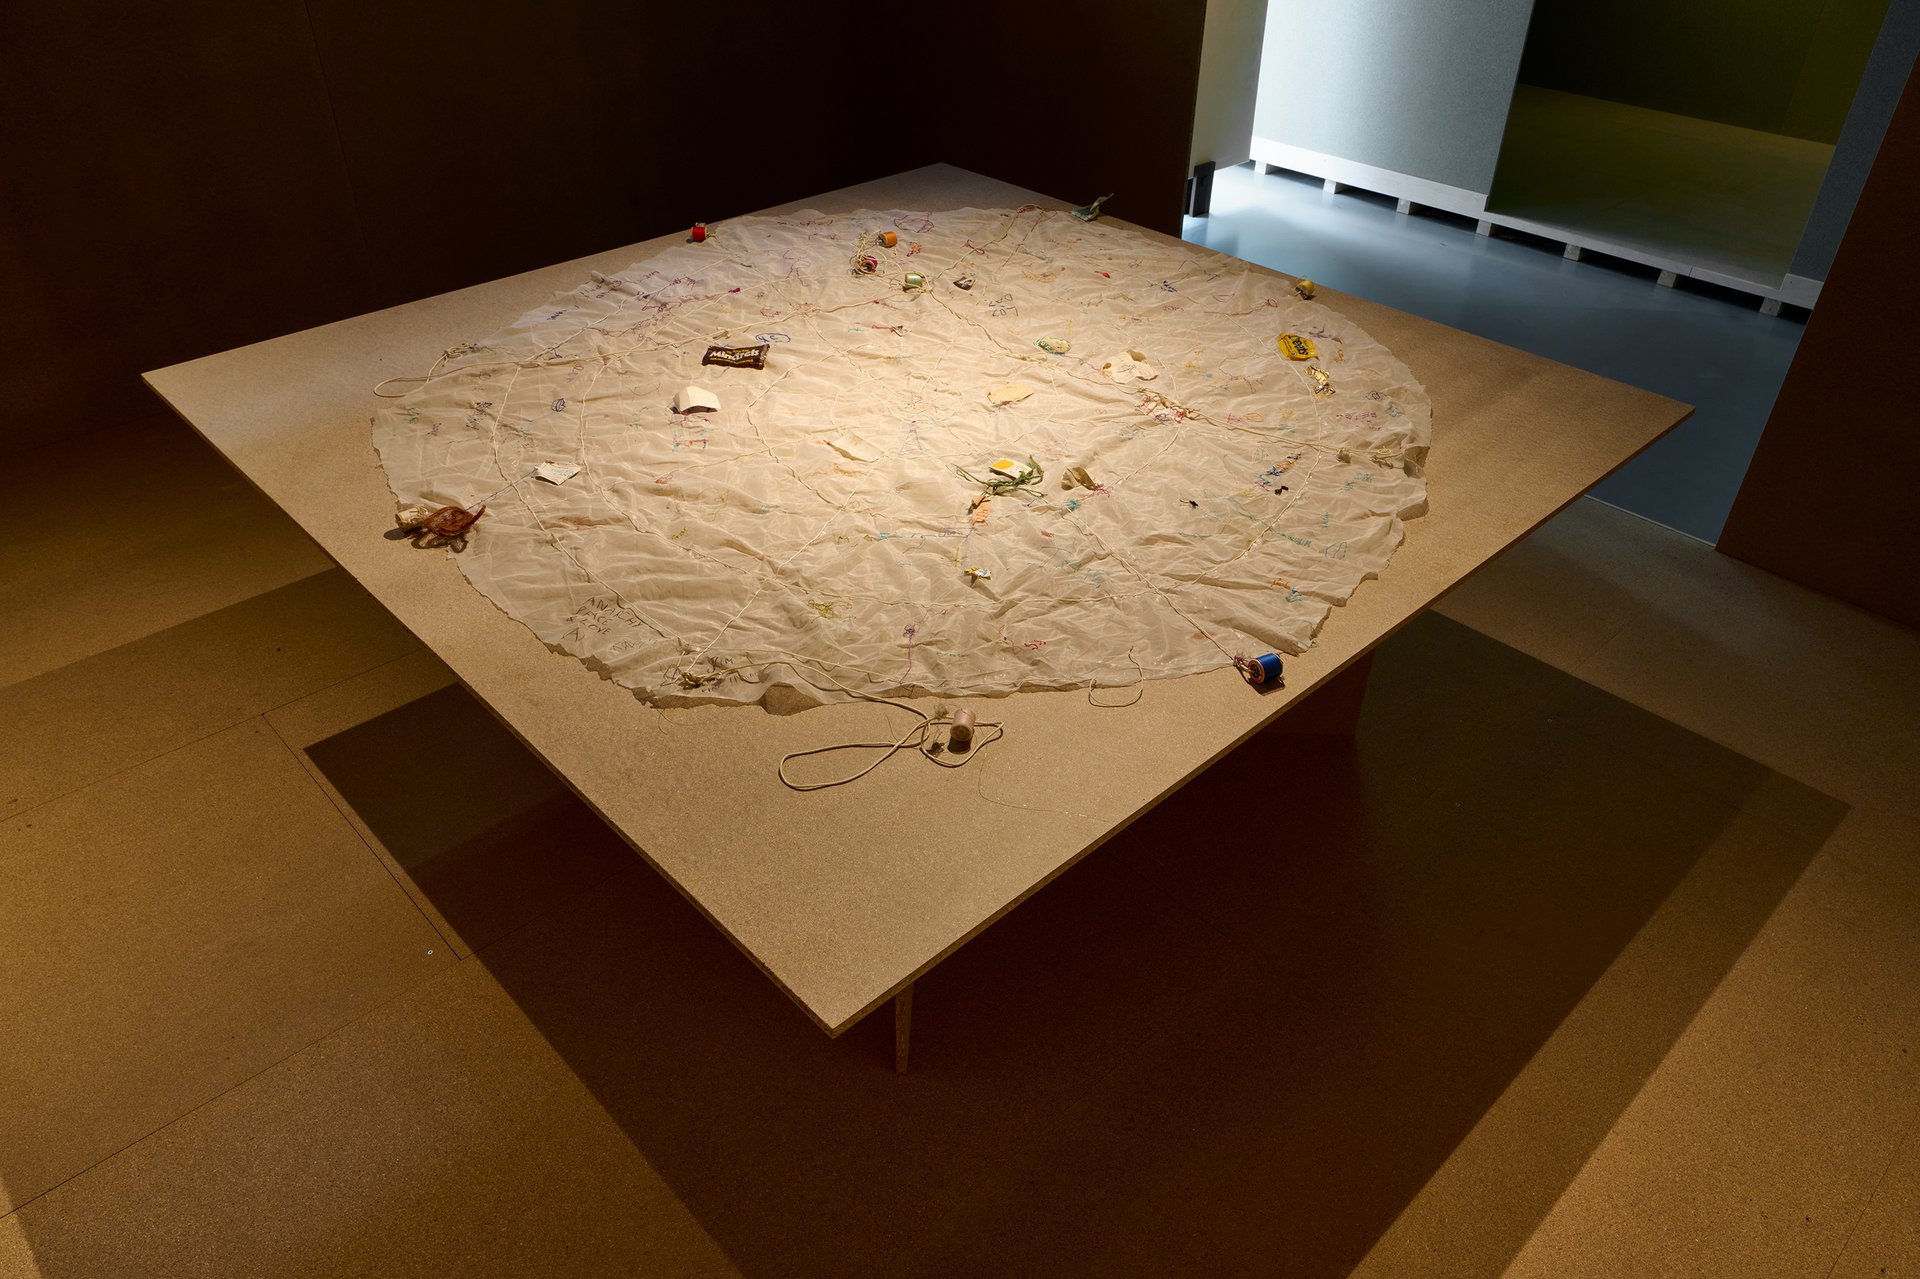 David Medalla, Stitch in Time, 1981-1982, Various materials and thread on nylon Fabric, 162 x 152,5 x 5,5 cm, Bonner Kunstverein, 2021. 